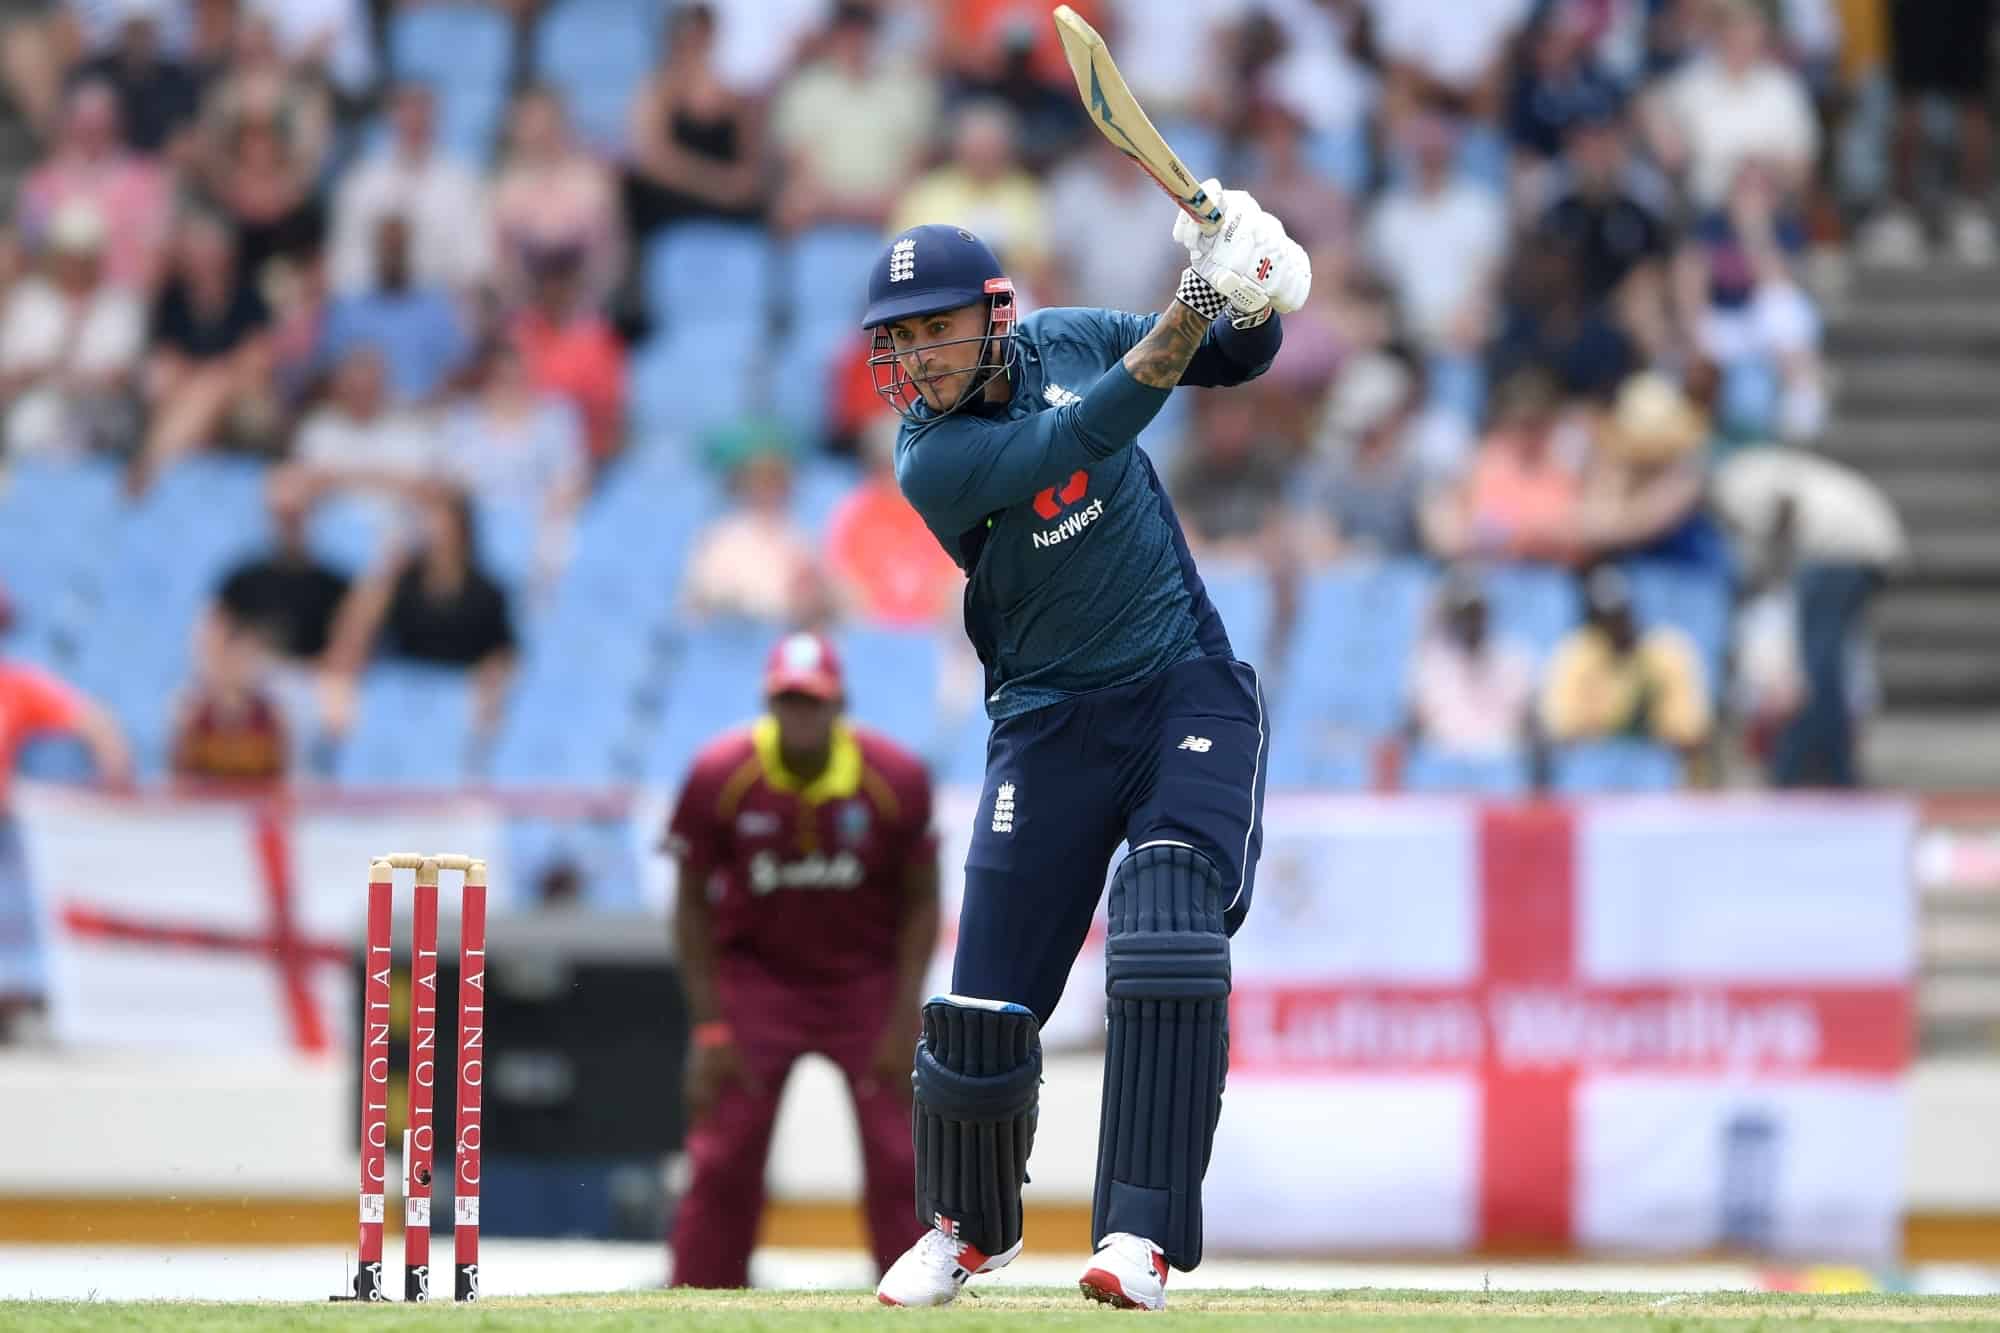 "Was Given Hope And Stabbed Again On Old Wounds" - Twitter Slams ECB For Not Picking Alex Hales In Revised Squad For Pakistan ODIs